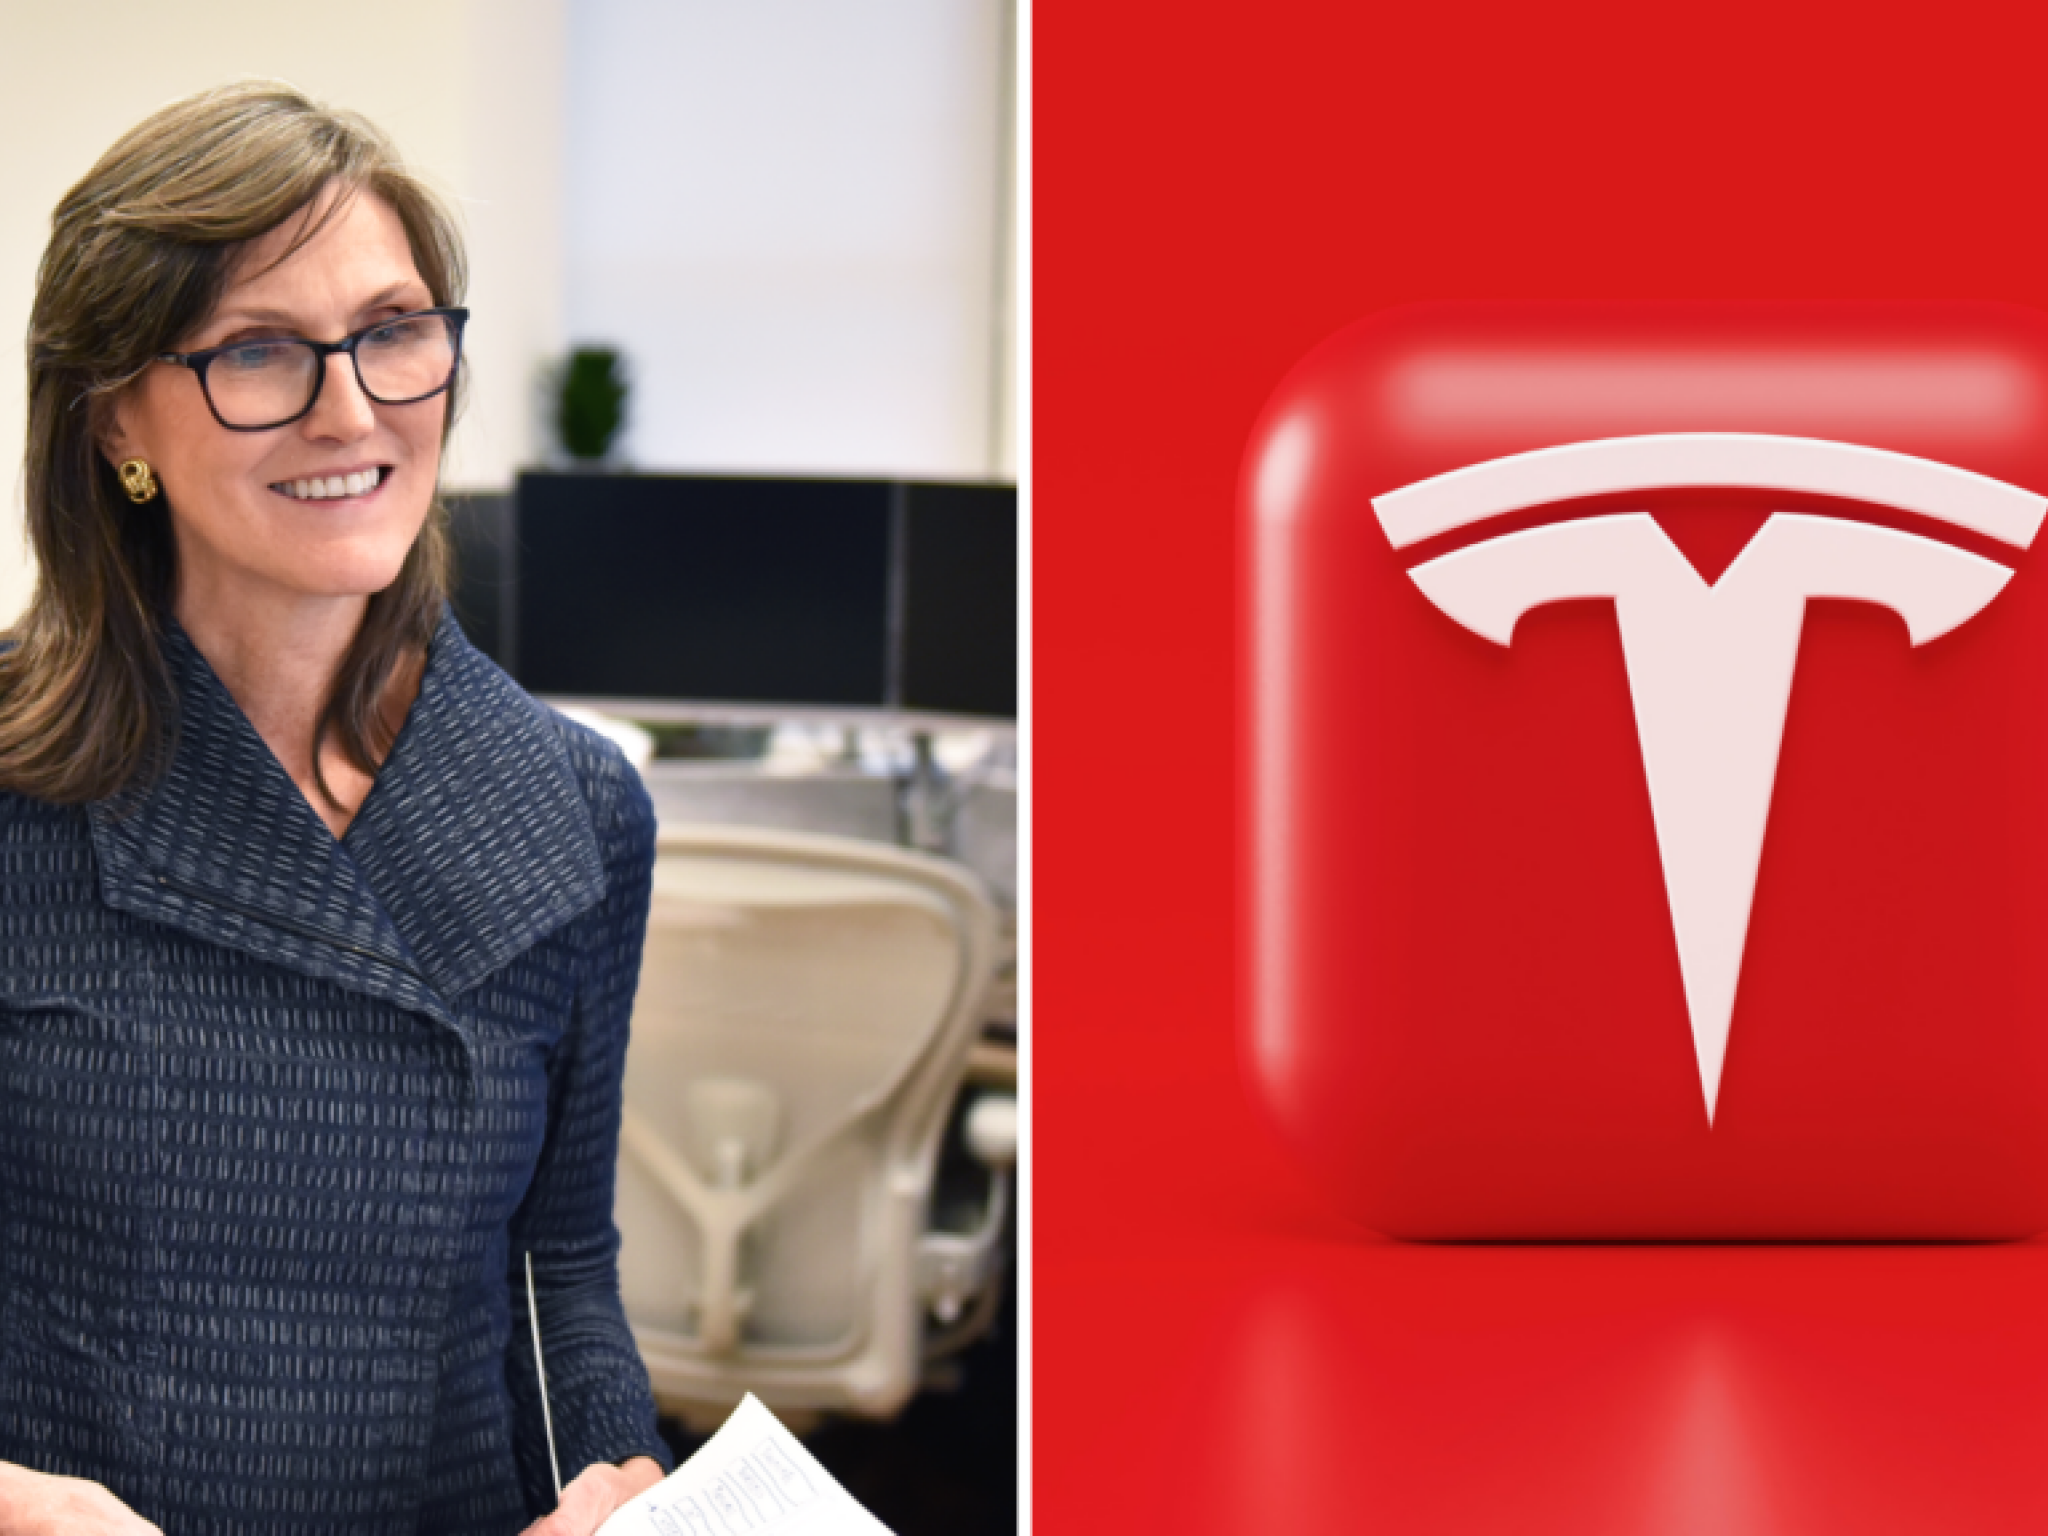  cathie-woods-ark-invest-dumps-another-325m-worth-of-tesla-shares-amid-searing-q2-deliveries-rally 